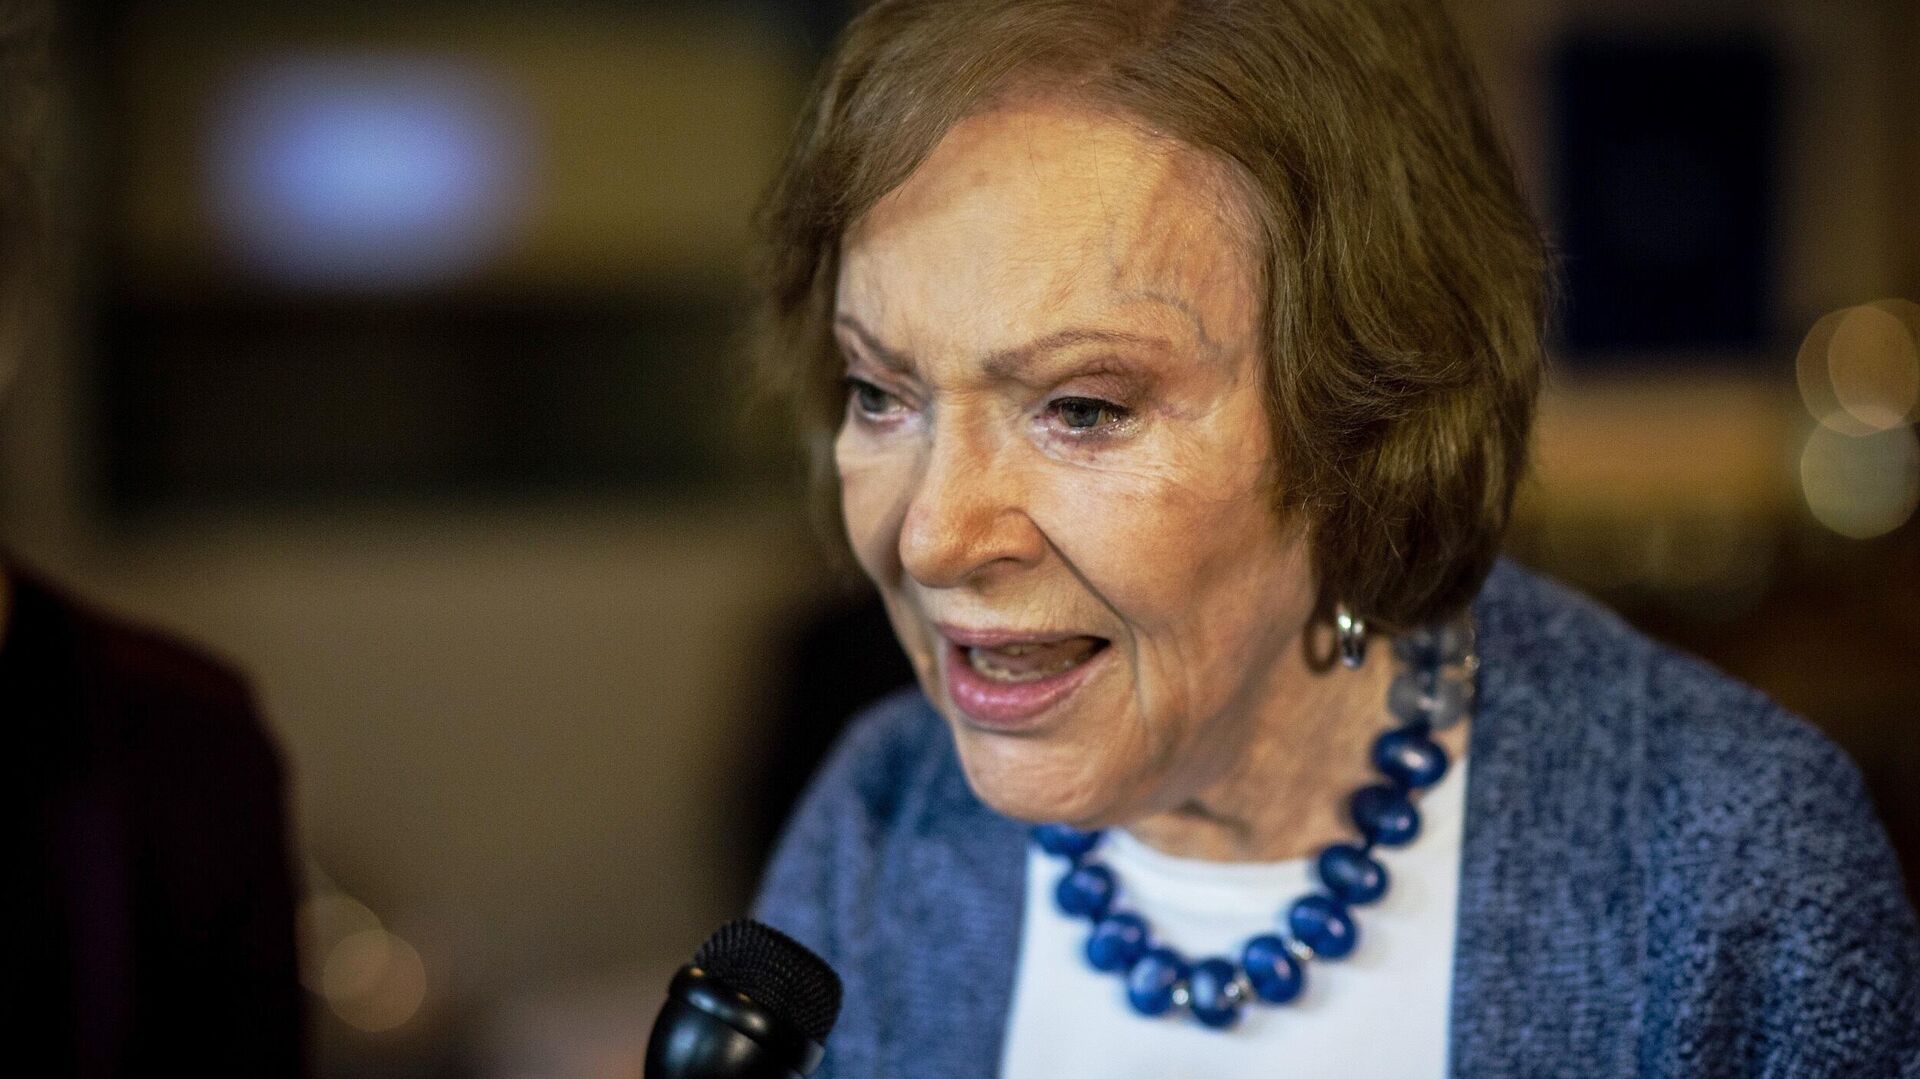 The former First Lady Rosalynn Carter speaks to the press at conference at The Carter Center on Tuesday, Nov. 5, 2019, in Atlanta. Carter enjoyed a light lunch in the audience as a panel discussion led by Judy Woodruff, anchor of PBS NewsHour, took center stage. The former First Lady made remarks about her upbringing as a caregiver and the health of her husband, former President Jimmy Carter.  - Sputnik International, 1920, 19.11.2023